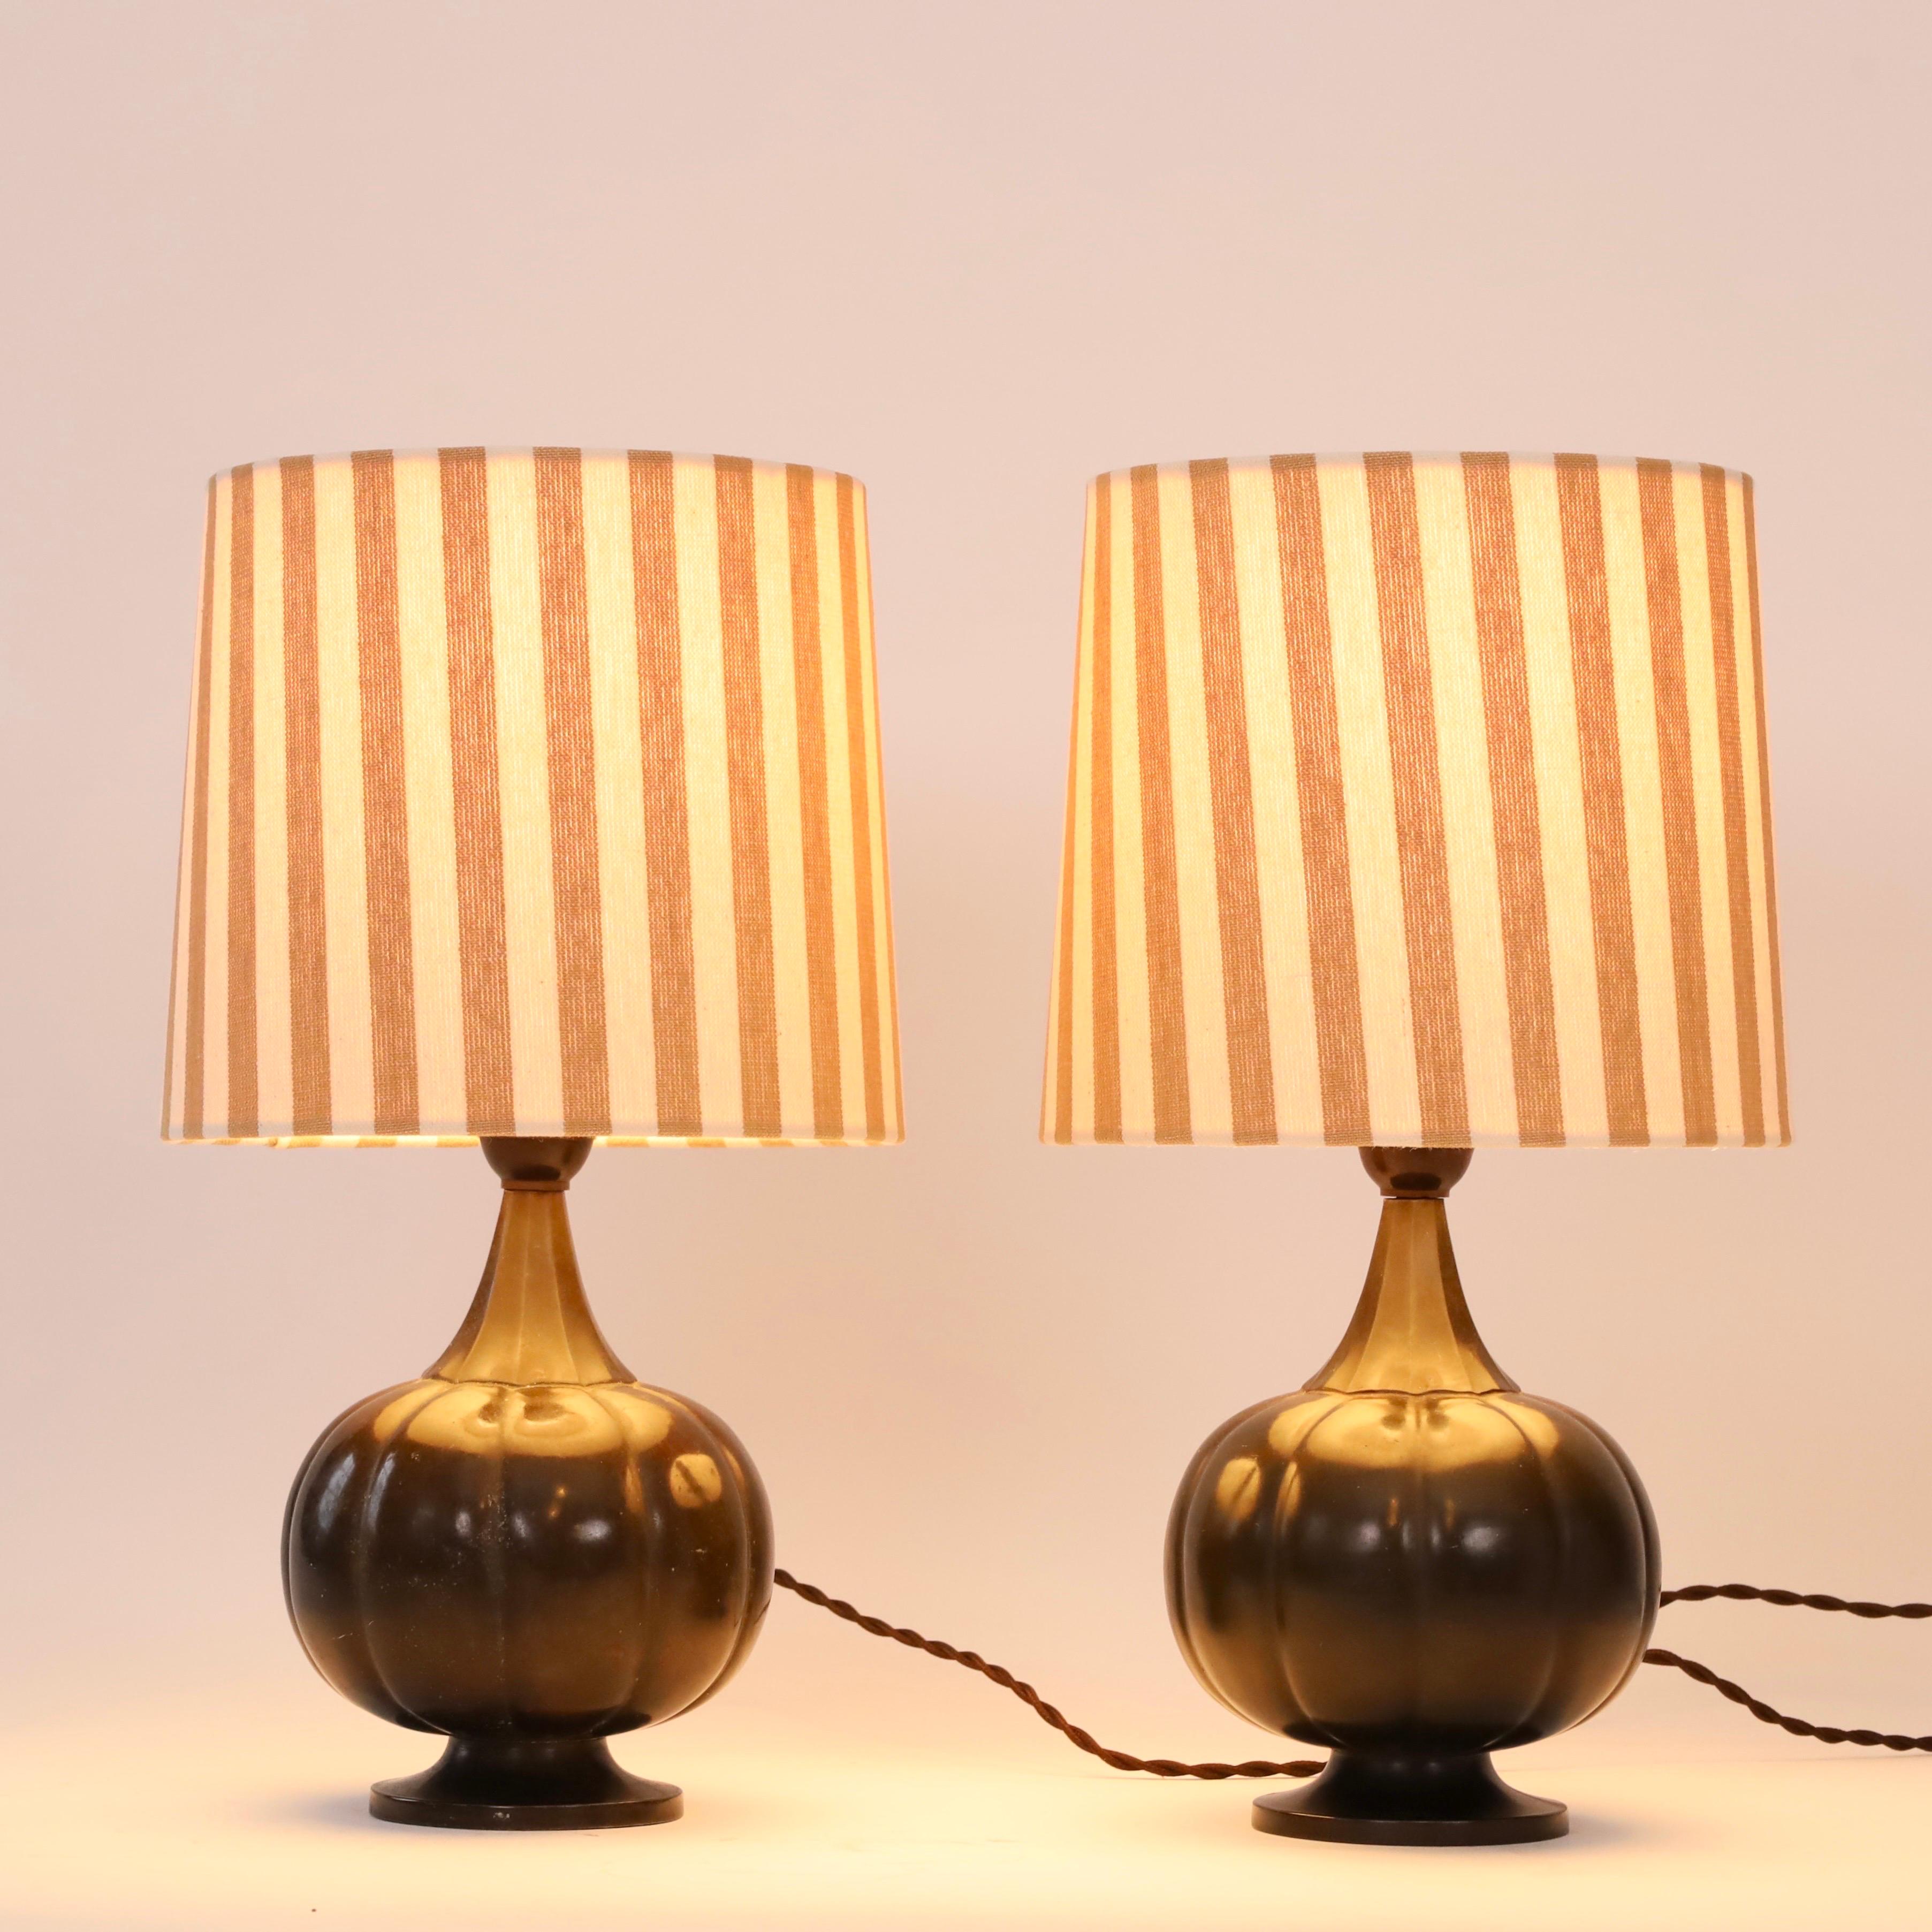 Set of round Just Andersen Table Lamps, 1920s, Denmark For Sale 5